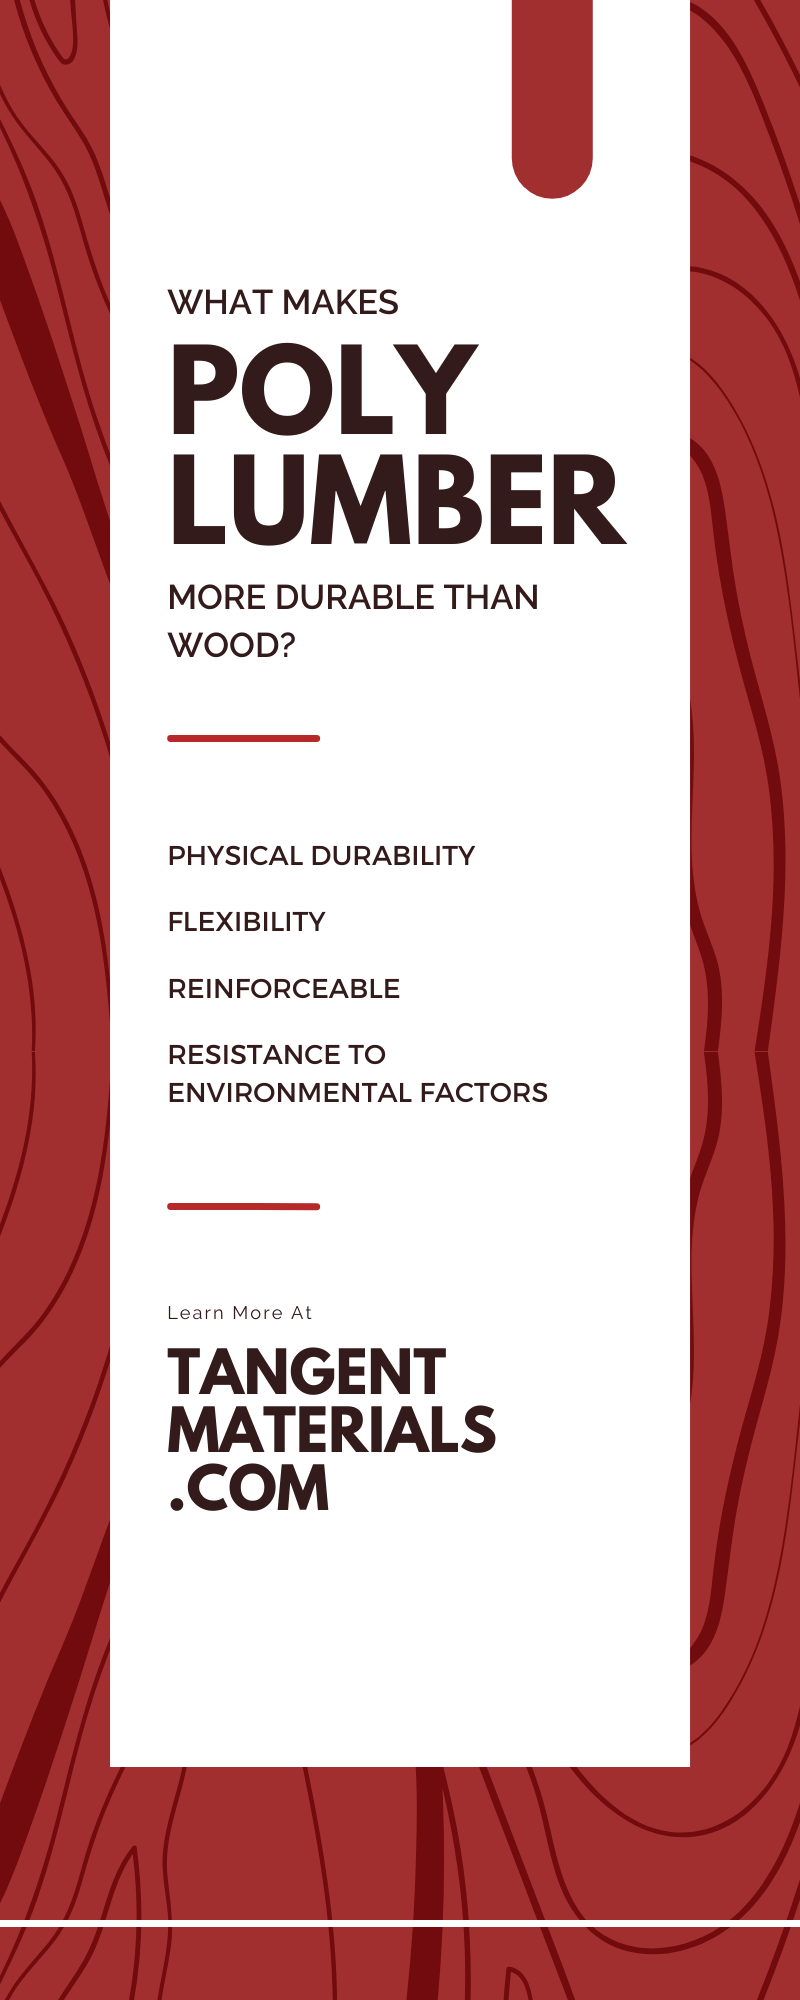 What Makes Poly Lumber More Durable Than Wood?